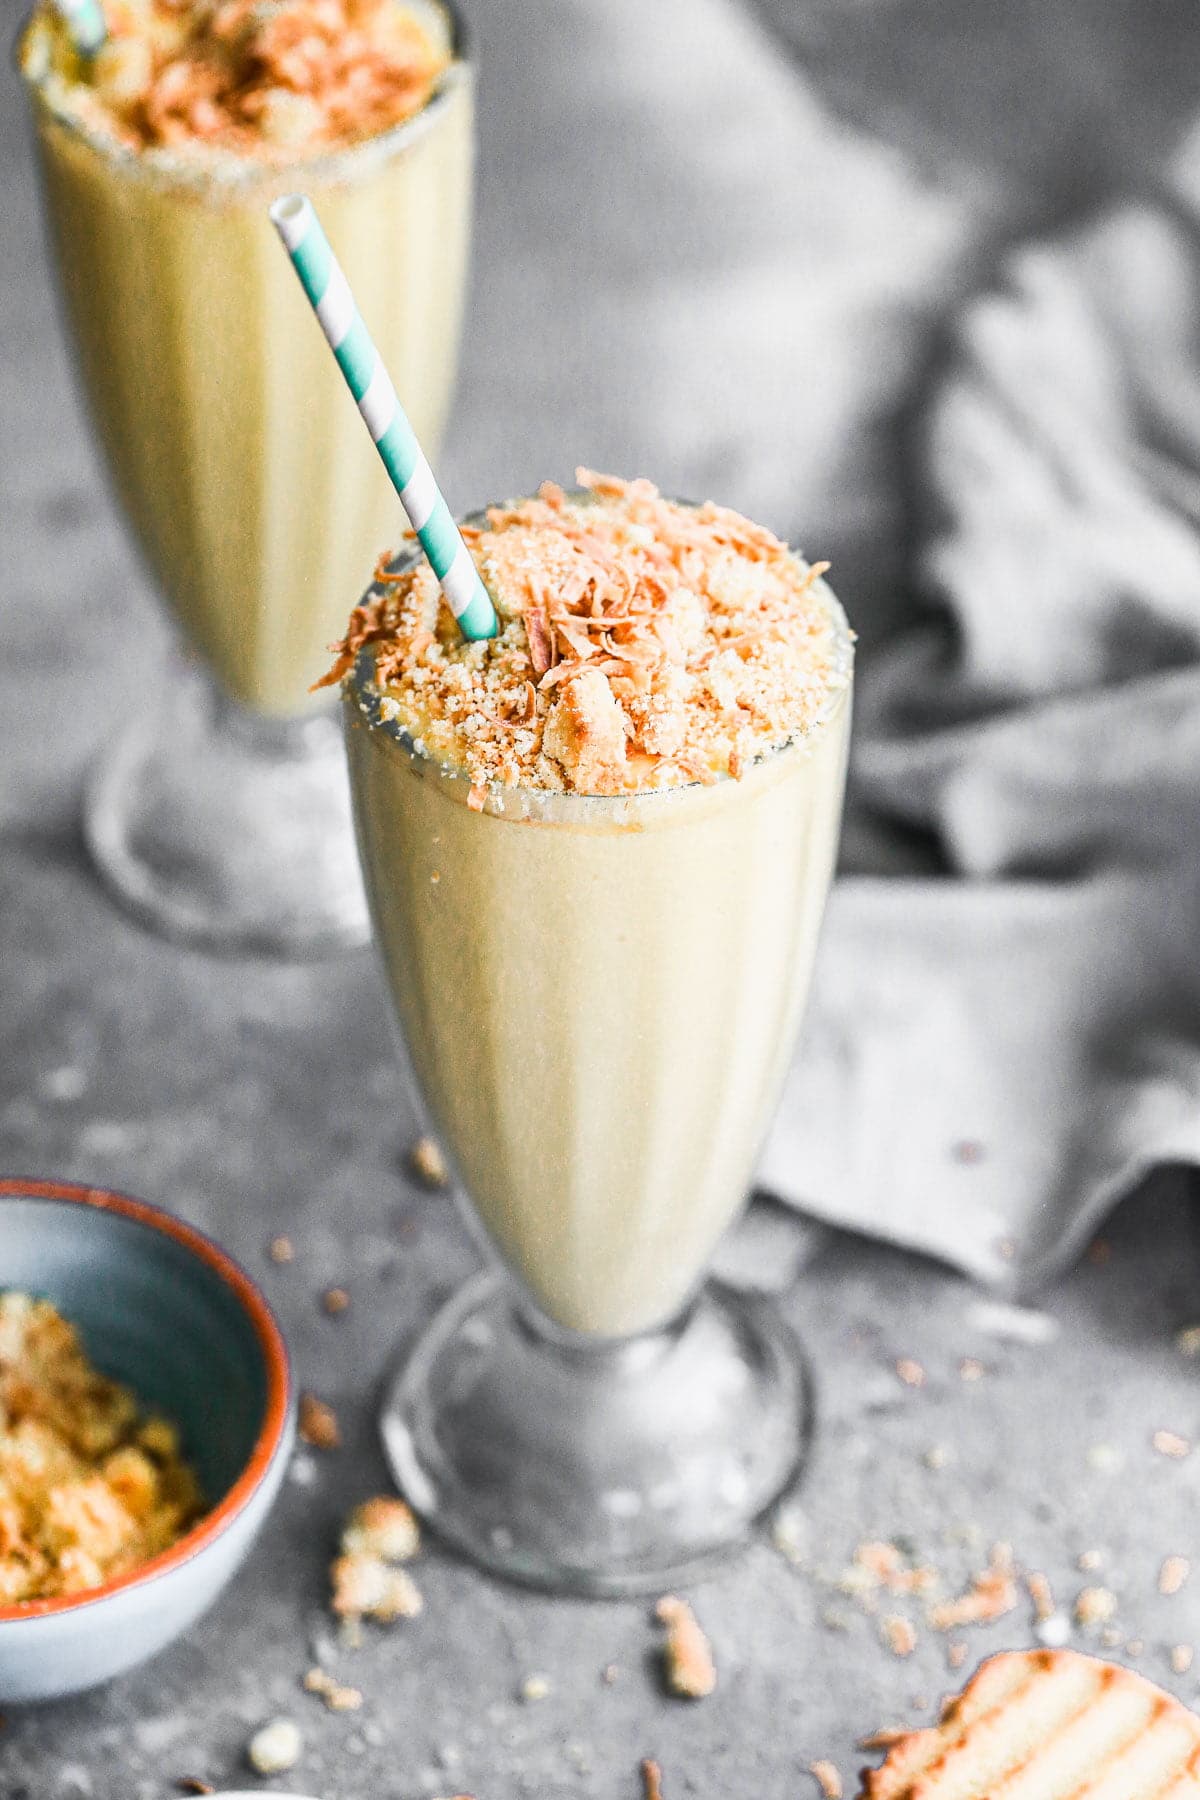 We're celebrating Oster's 75th Blending Anniversary with a Tropical Smoothie worthy of any special occasion. Filled with all your favorite tropical flavors - pineapple, mango, and coconut - this easy-to-throw-together smoothie turned dessert is irresistibly sweet, brimming with beach vibes and here to party. We top each ultra smooth, cold smoothie with toasted coconut and crushed shortbread cookies for the perfect play on texture. Don't miss this one! 